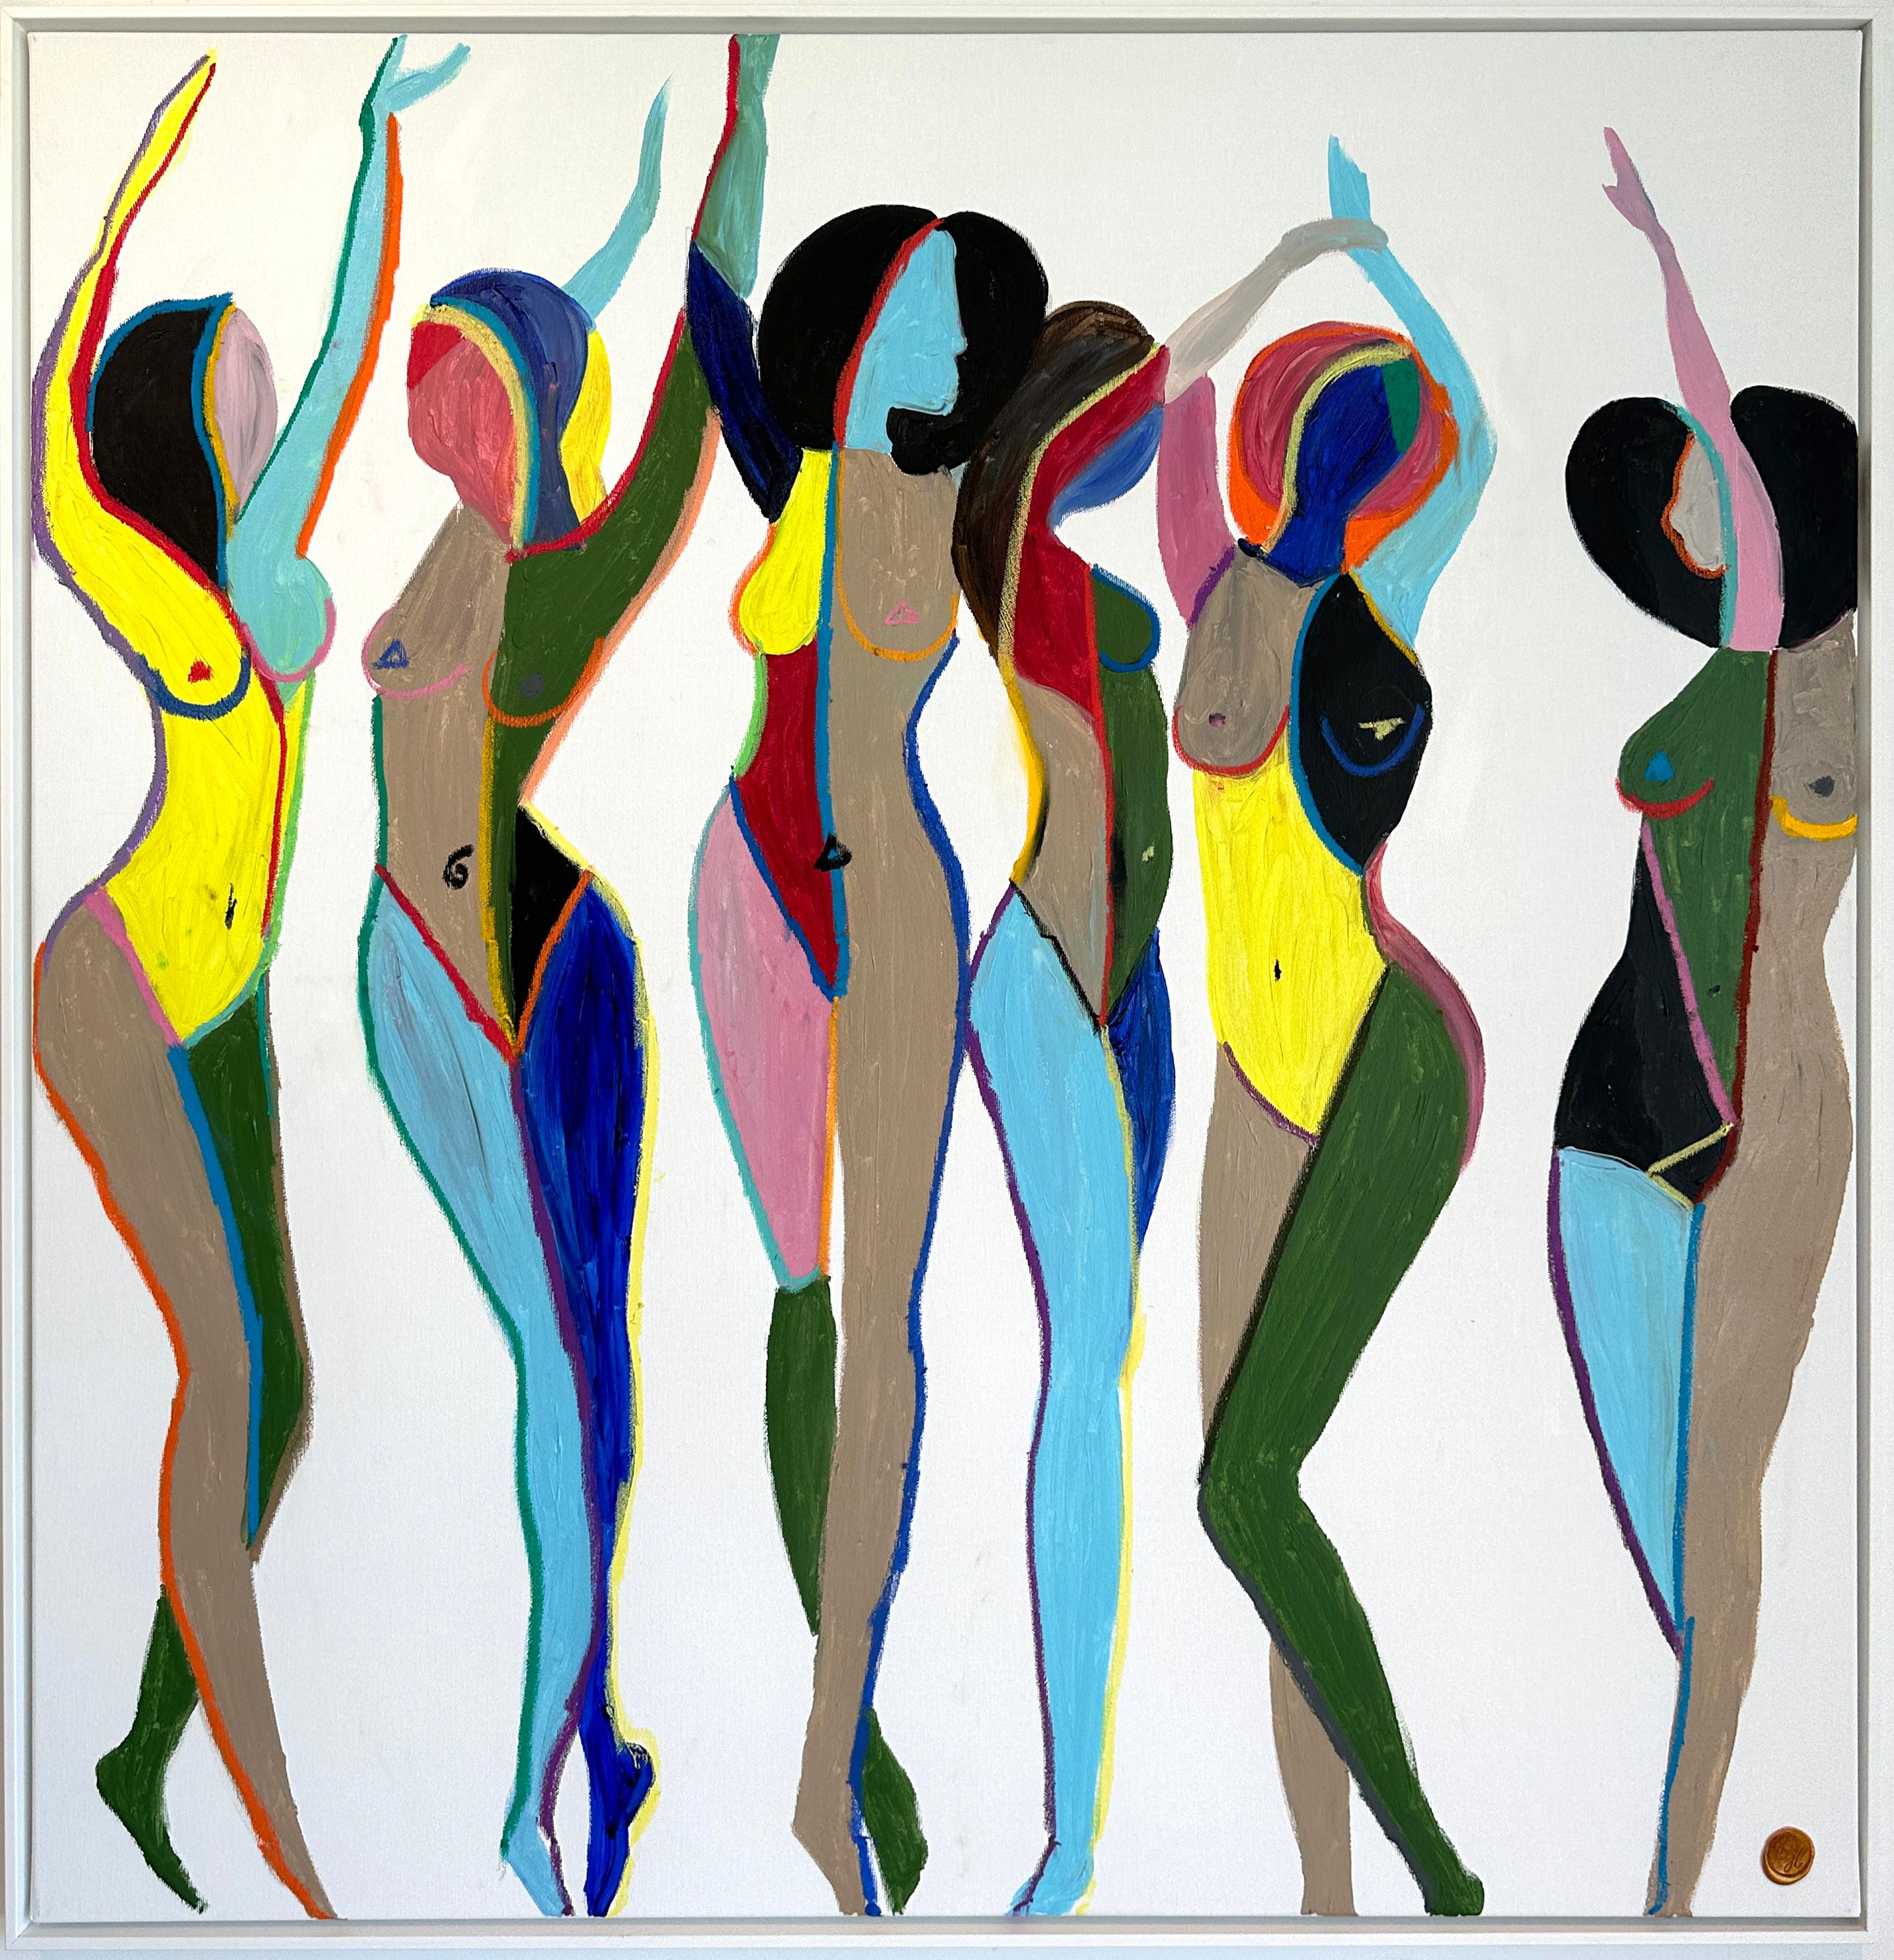 Katharina Hormel Abstract Painting - Joy after Matisse by K. Hormel - Colorful Dancers Contemporary Oil painting